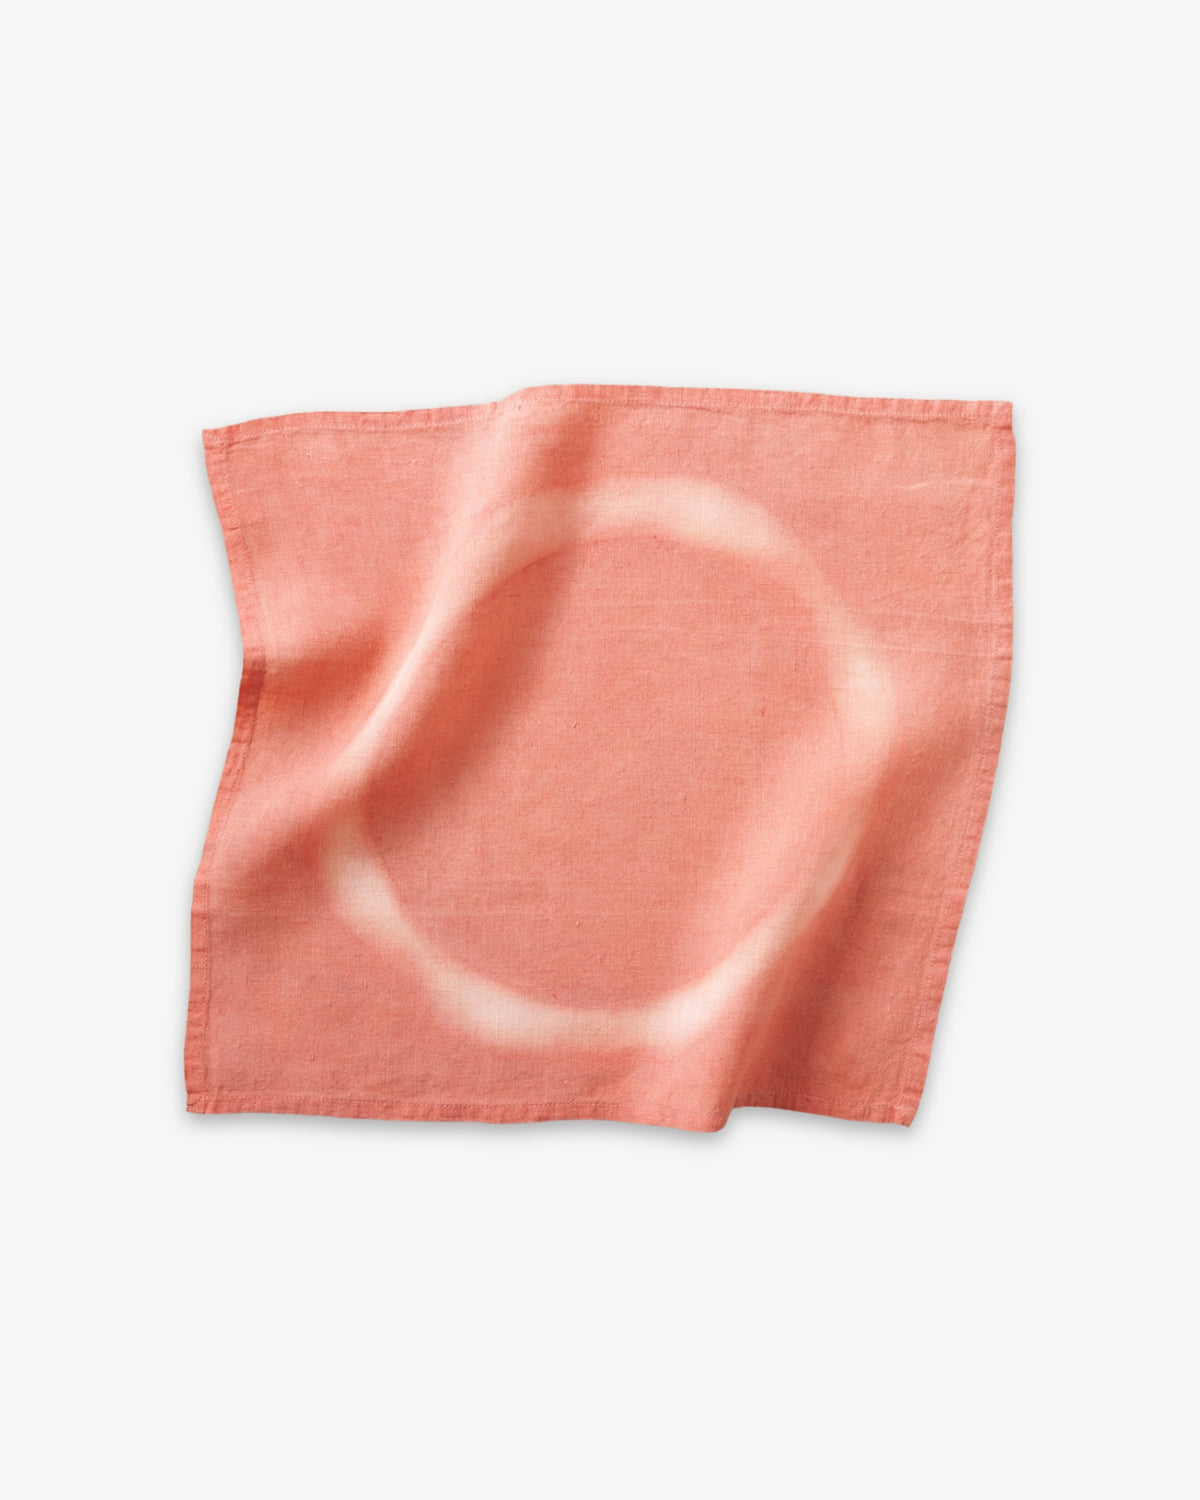 Hand-Dyed Altar Cloths by Noat